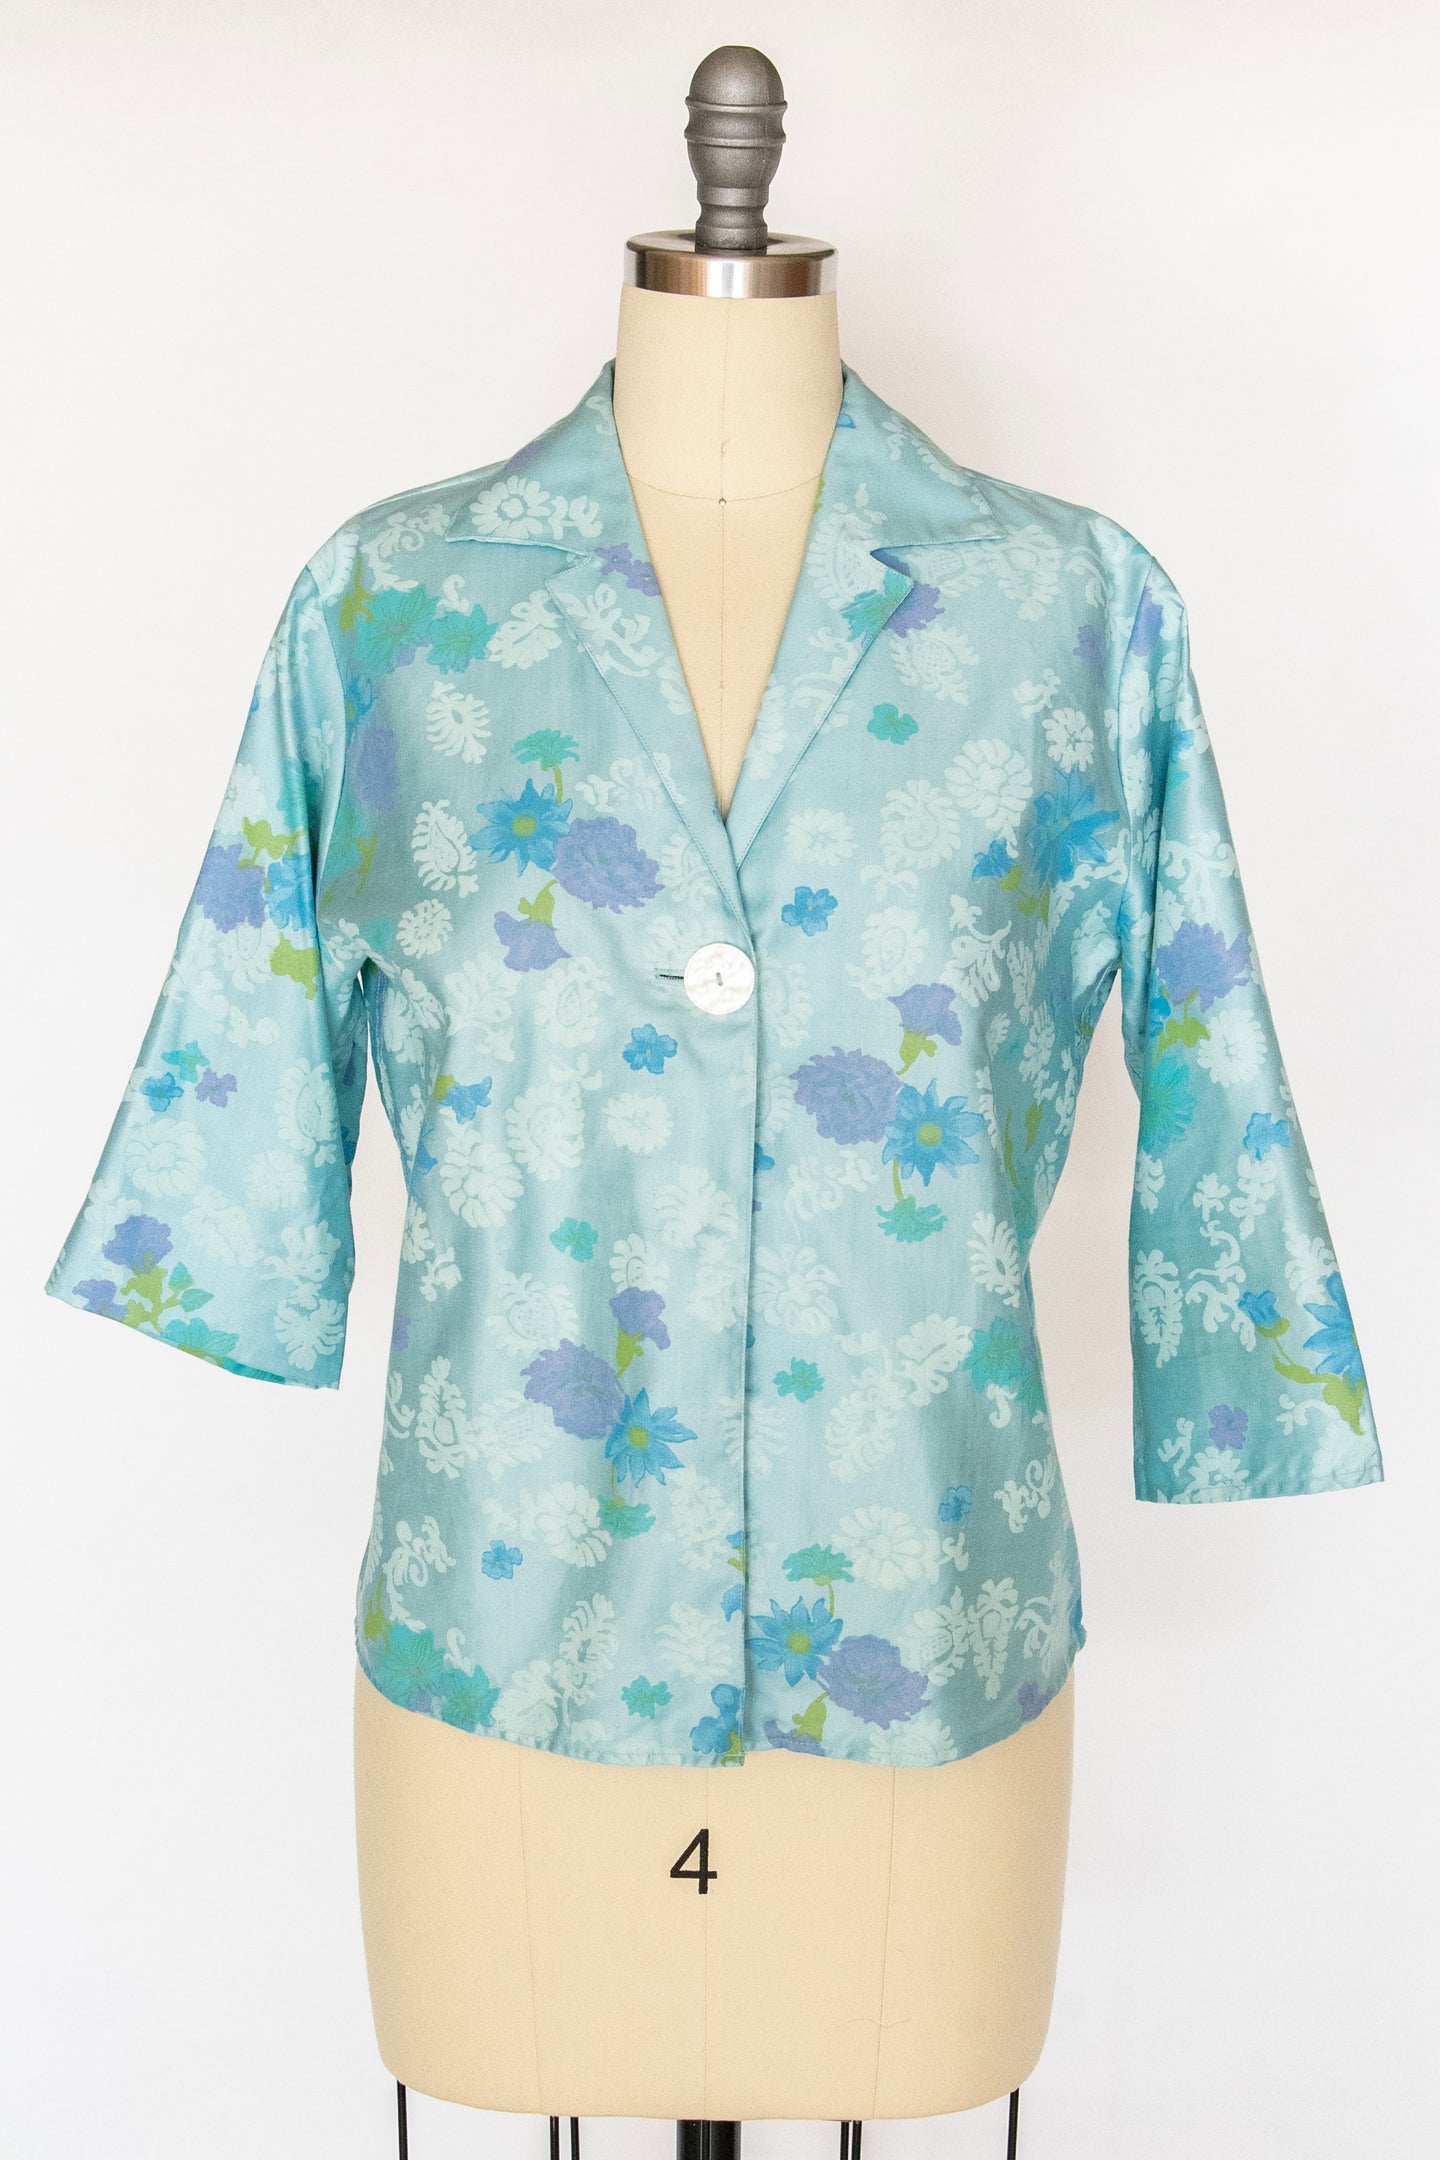 1960s Blouse Button Up Top M